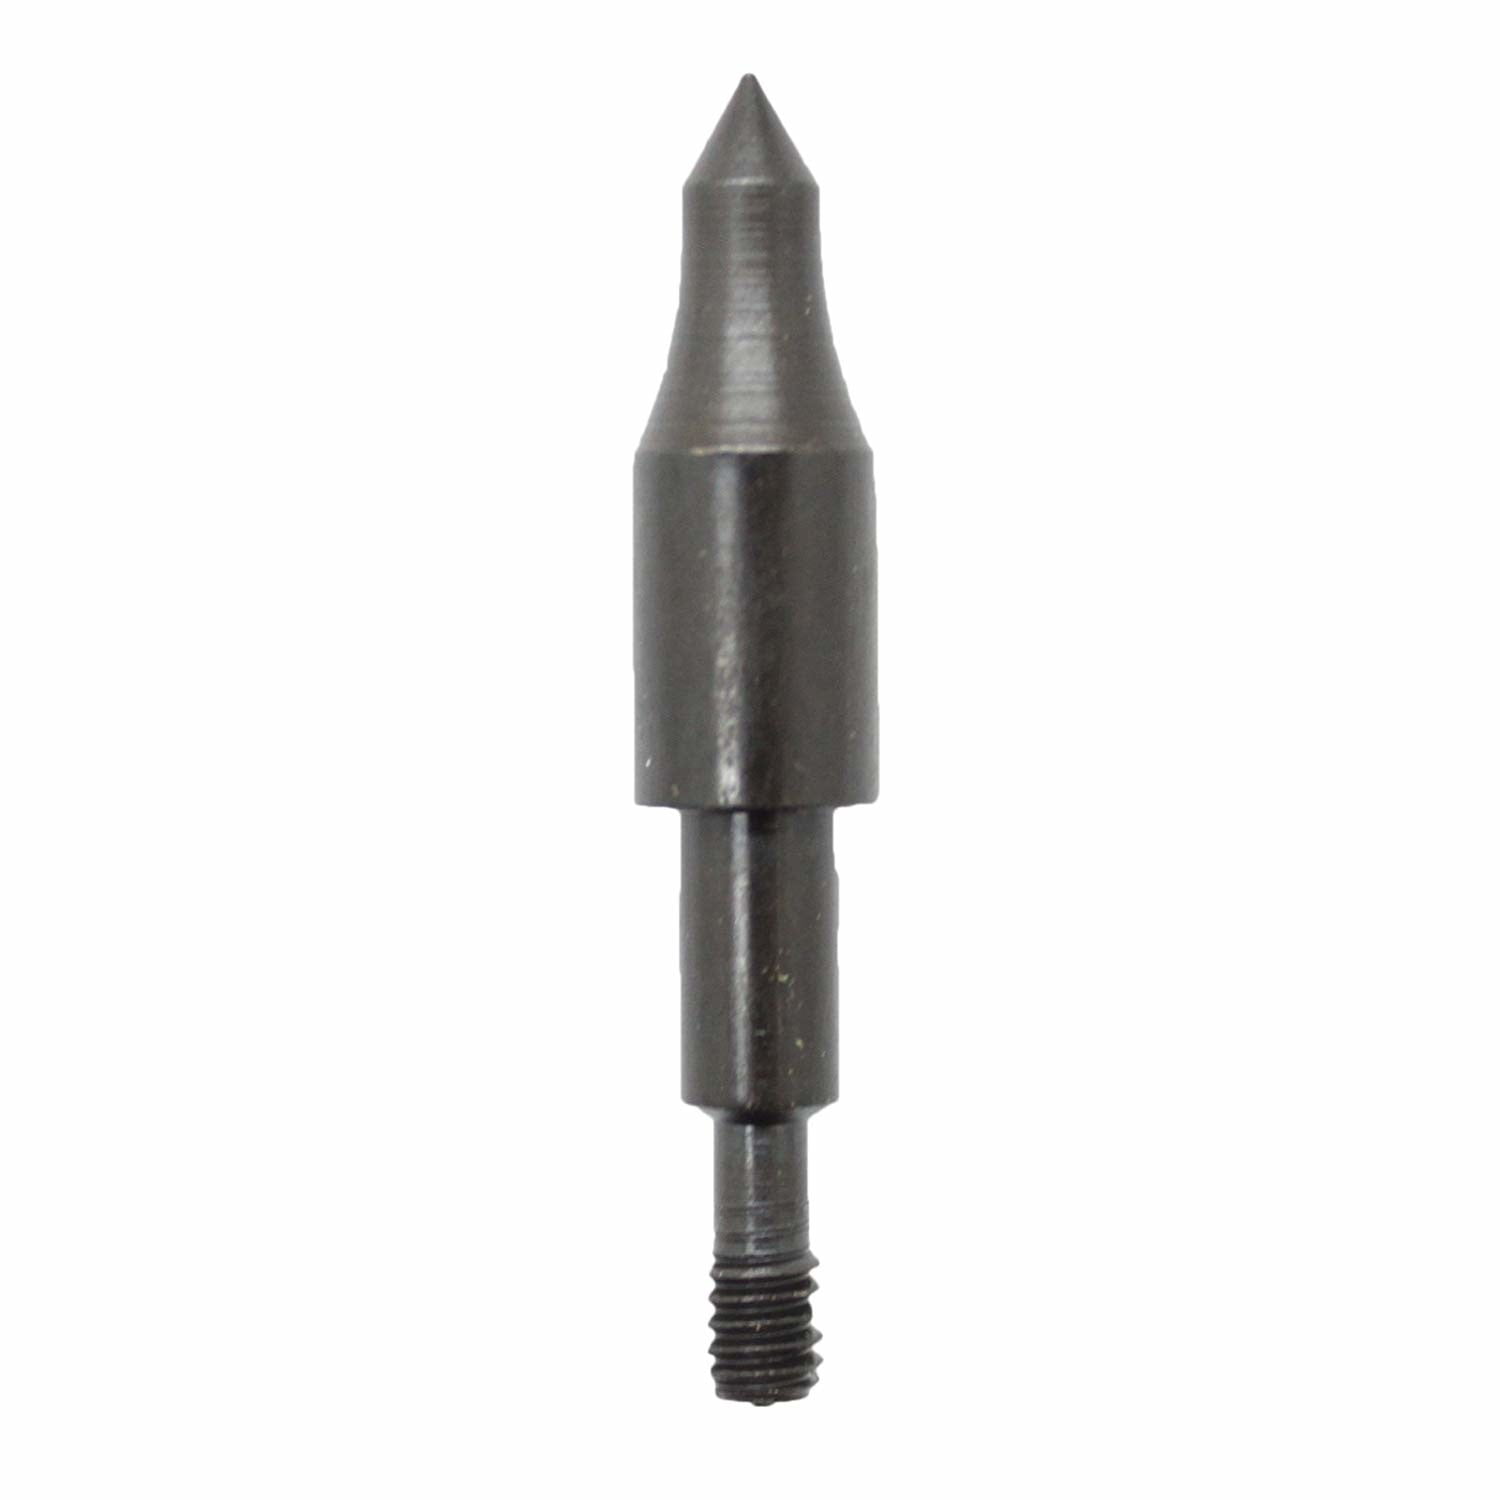 Field Point 100grain Black Screw-in Archery Bullet Points 5//16 and 11//32 for Arrow Field Target Practice Shooting